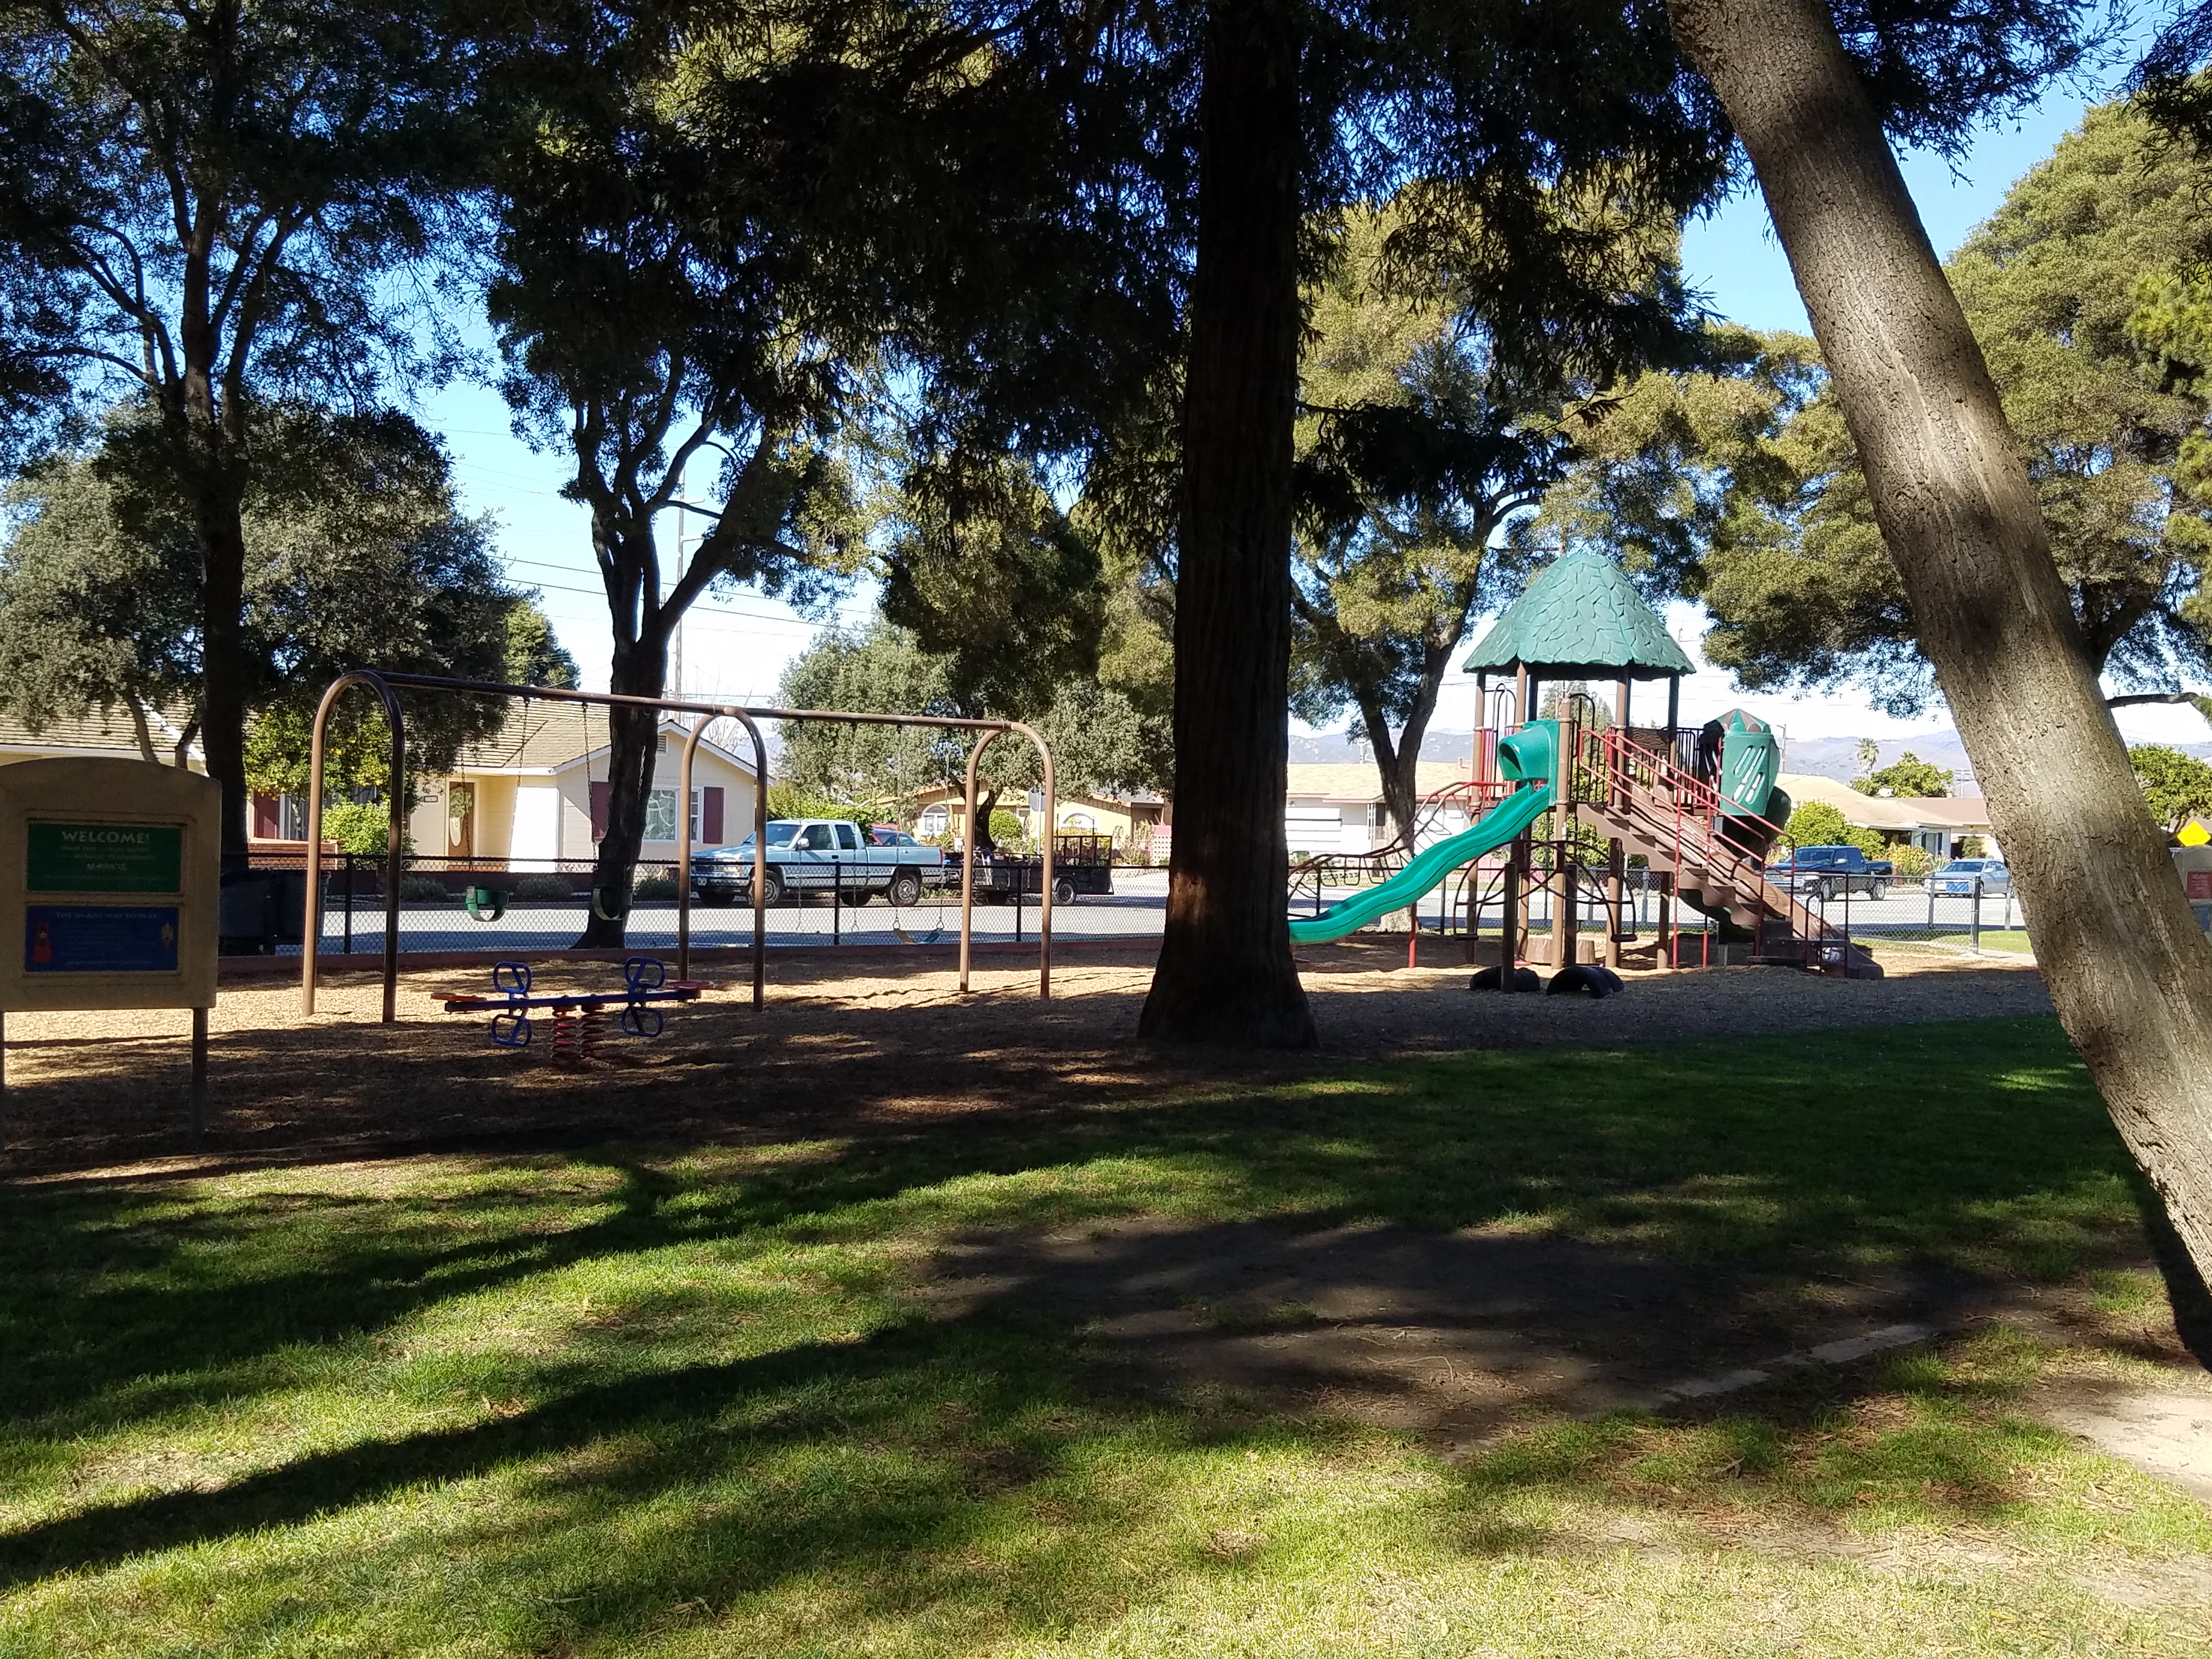 Photo of Central Park playground